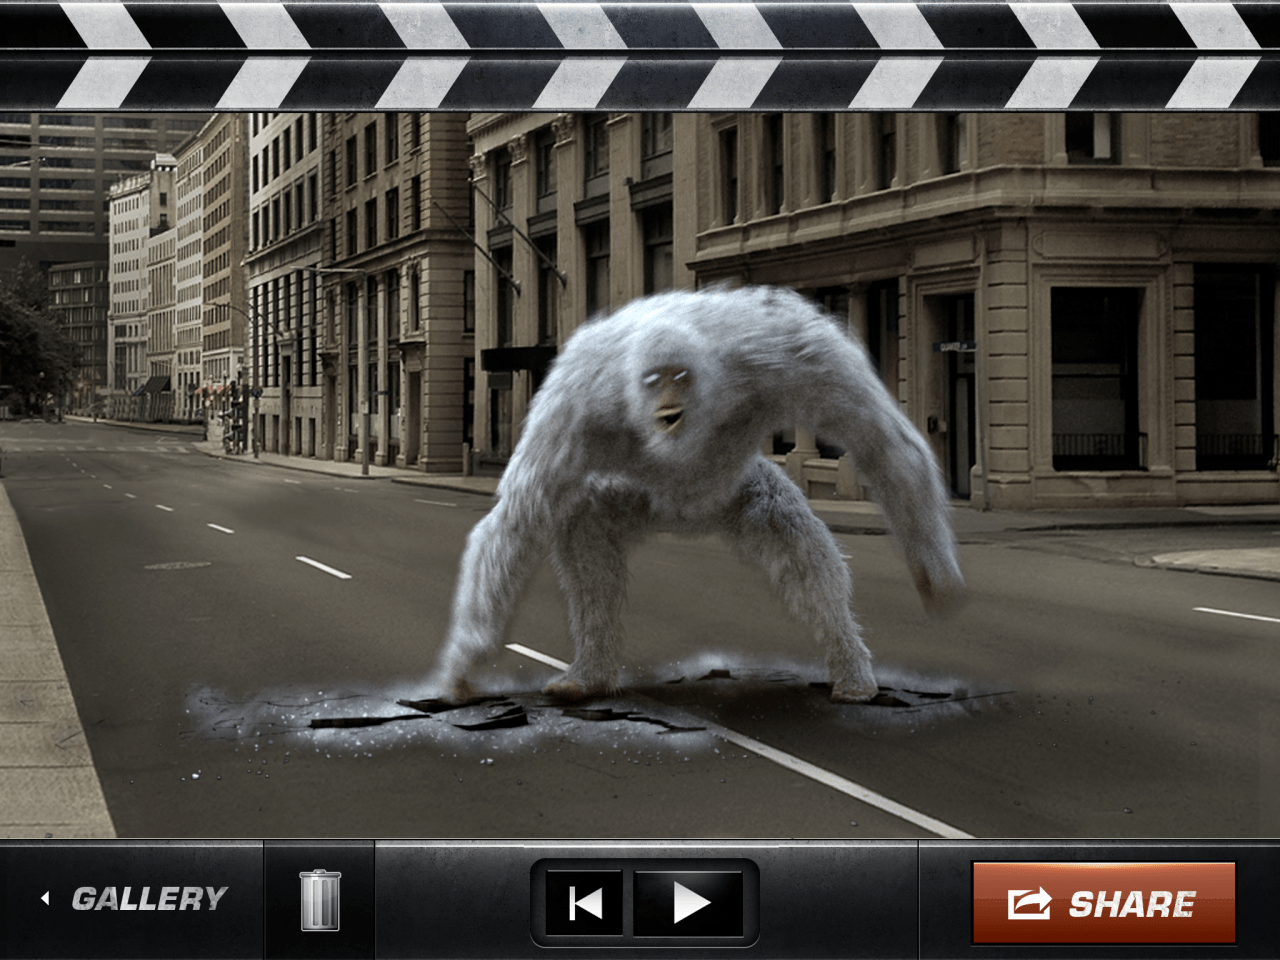 android version of action movie fx